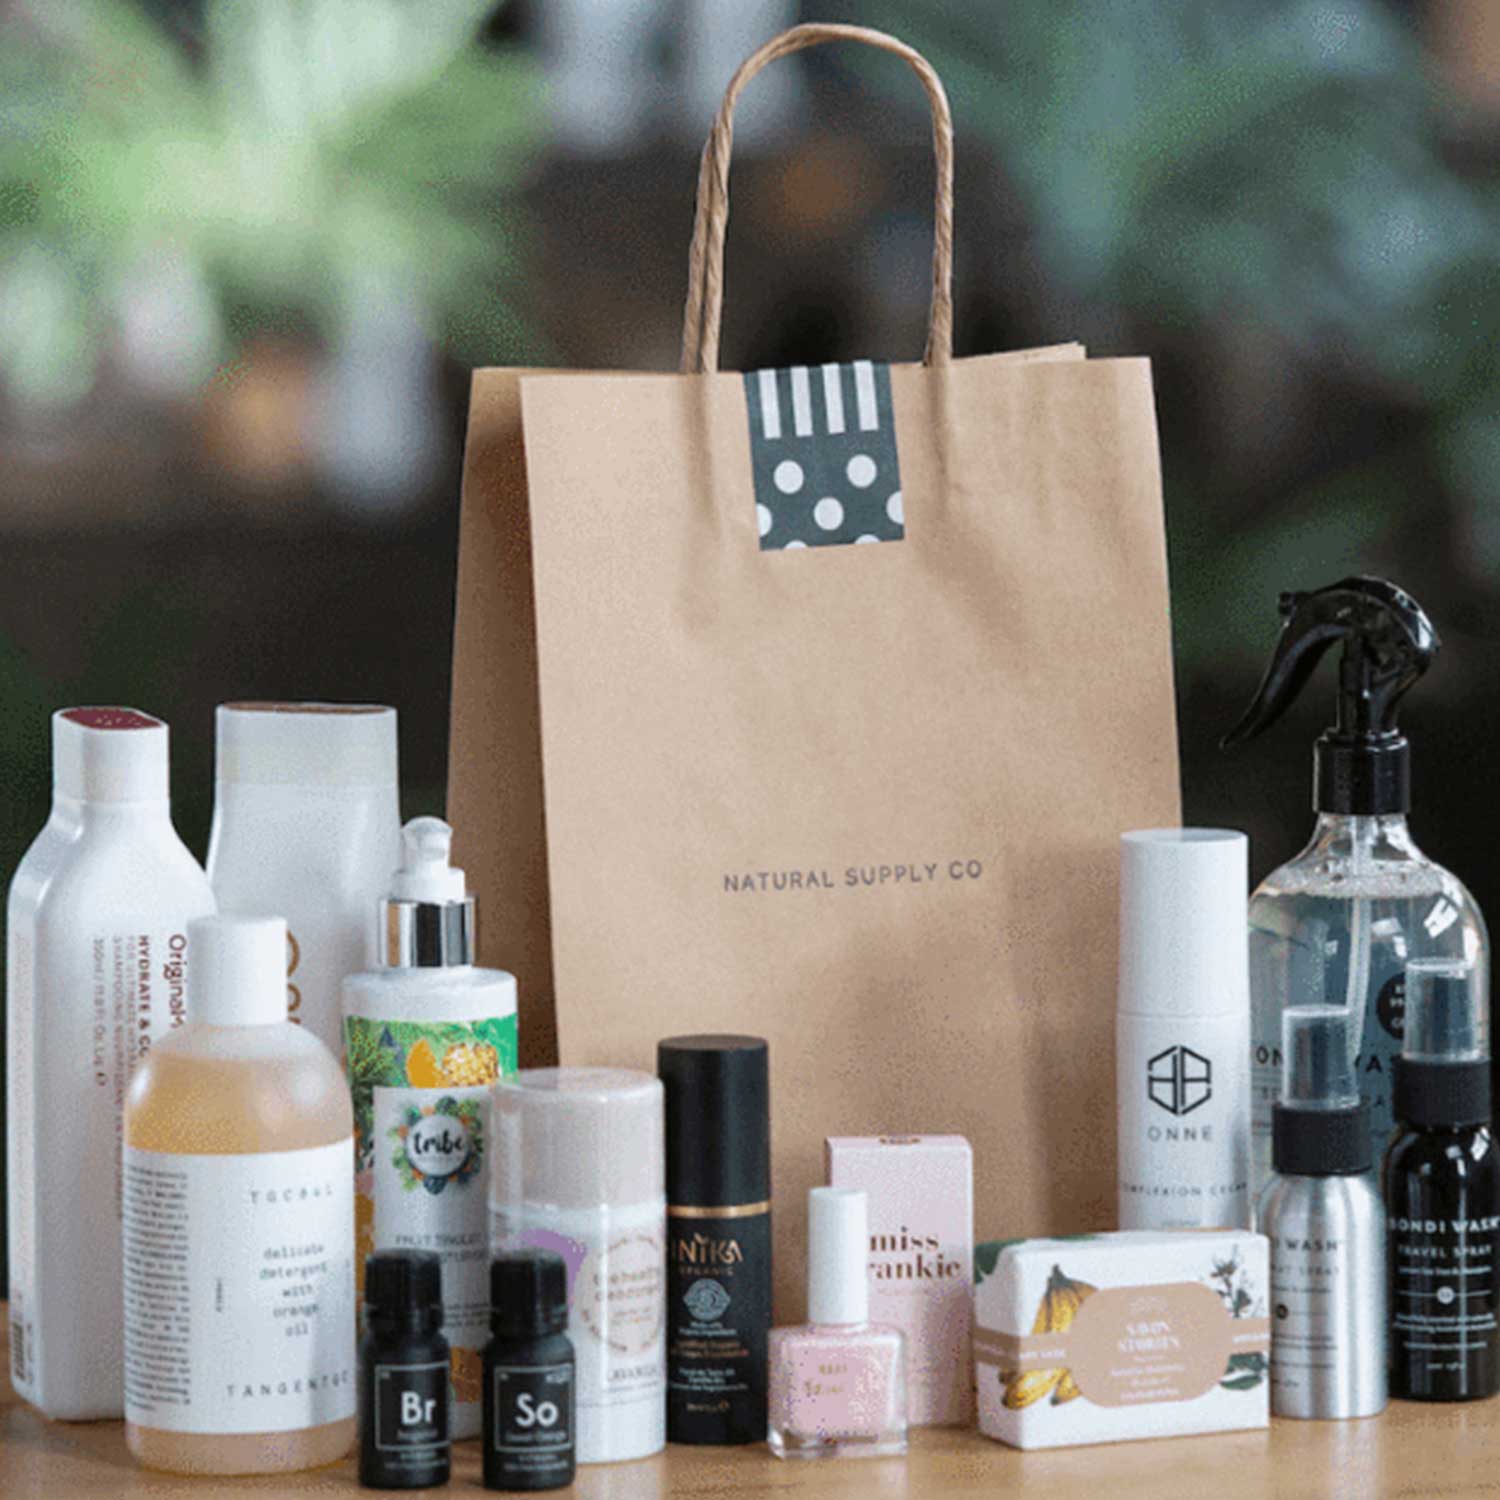 A table with a dozen Natural Supply skincare product. There is also a large paper bag with handles on the table.